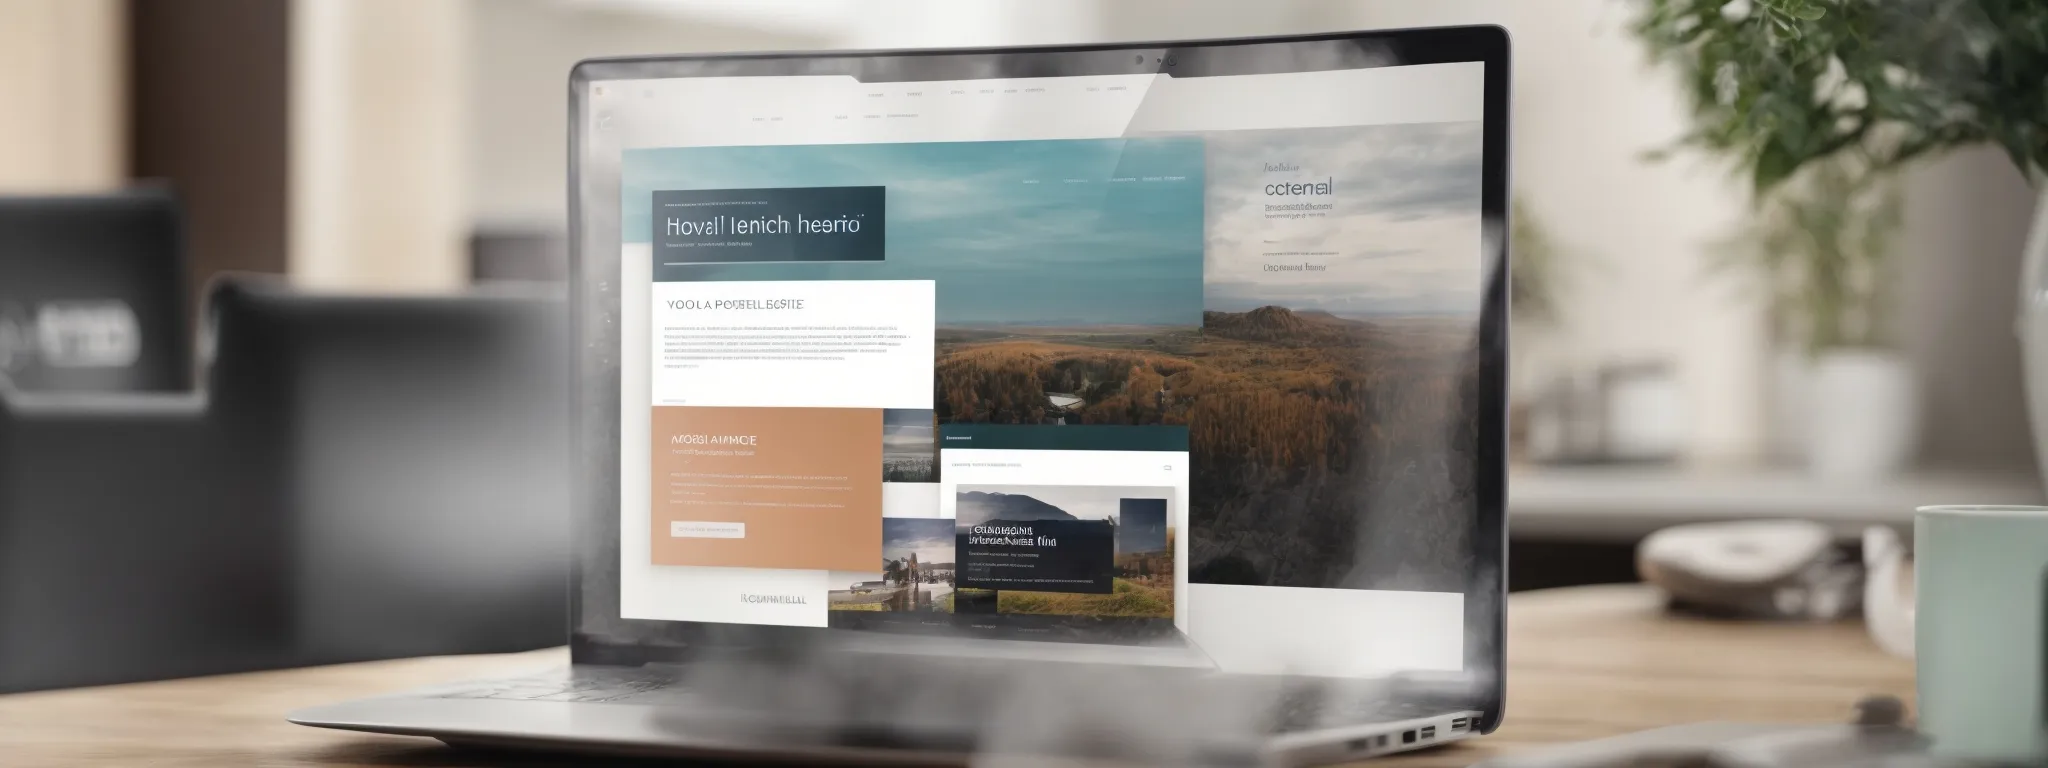 an open laptop with a clean, organized interface displaying a website's homepage for mental health services.